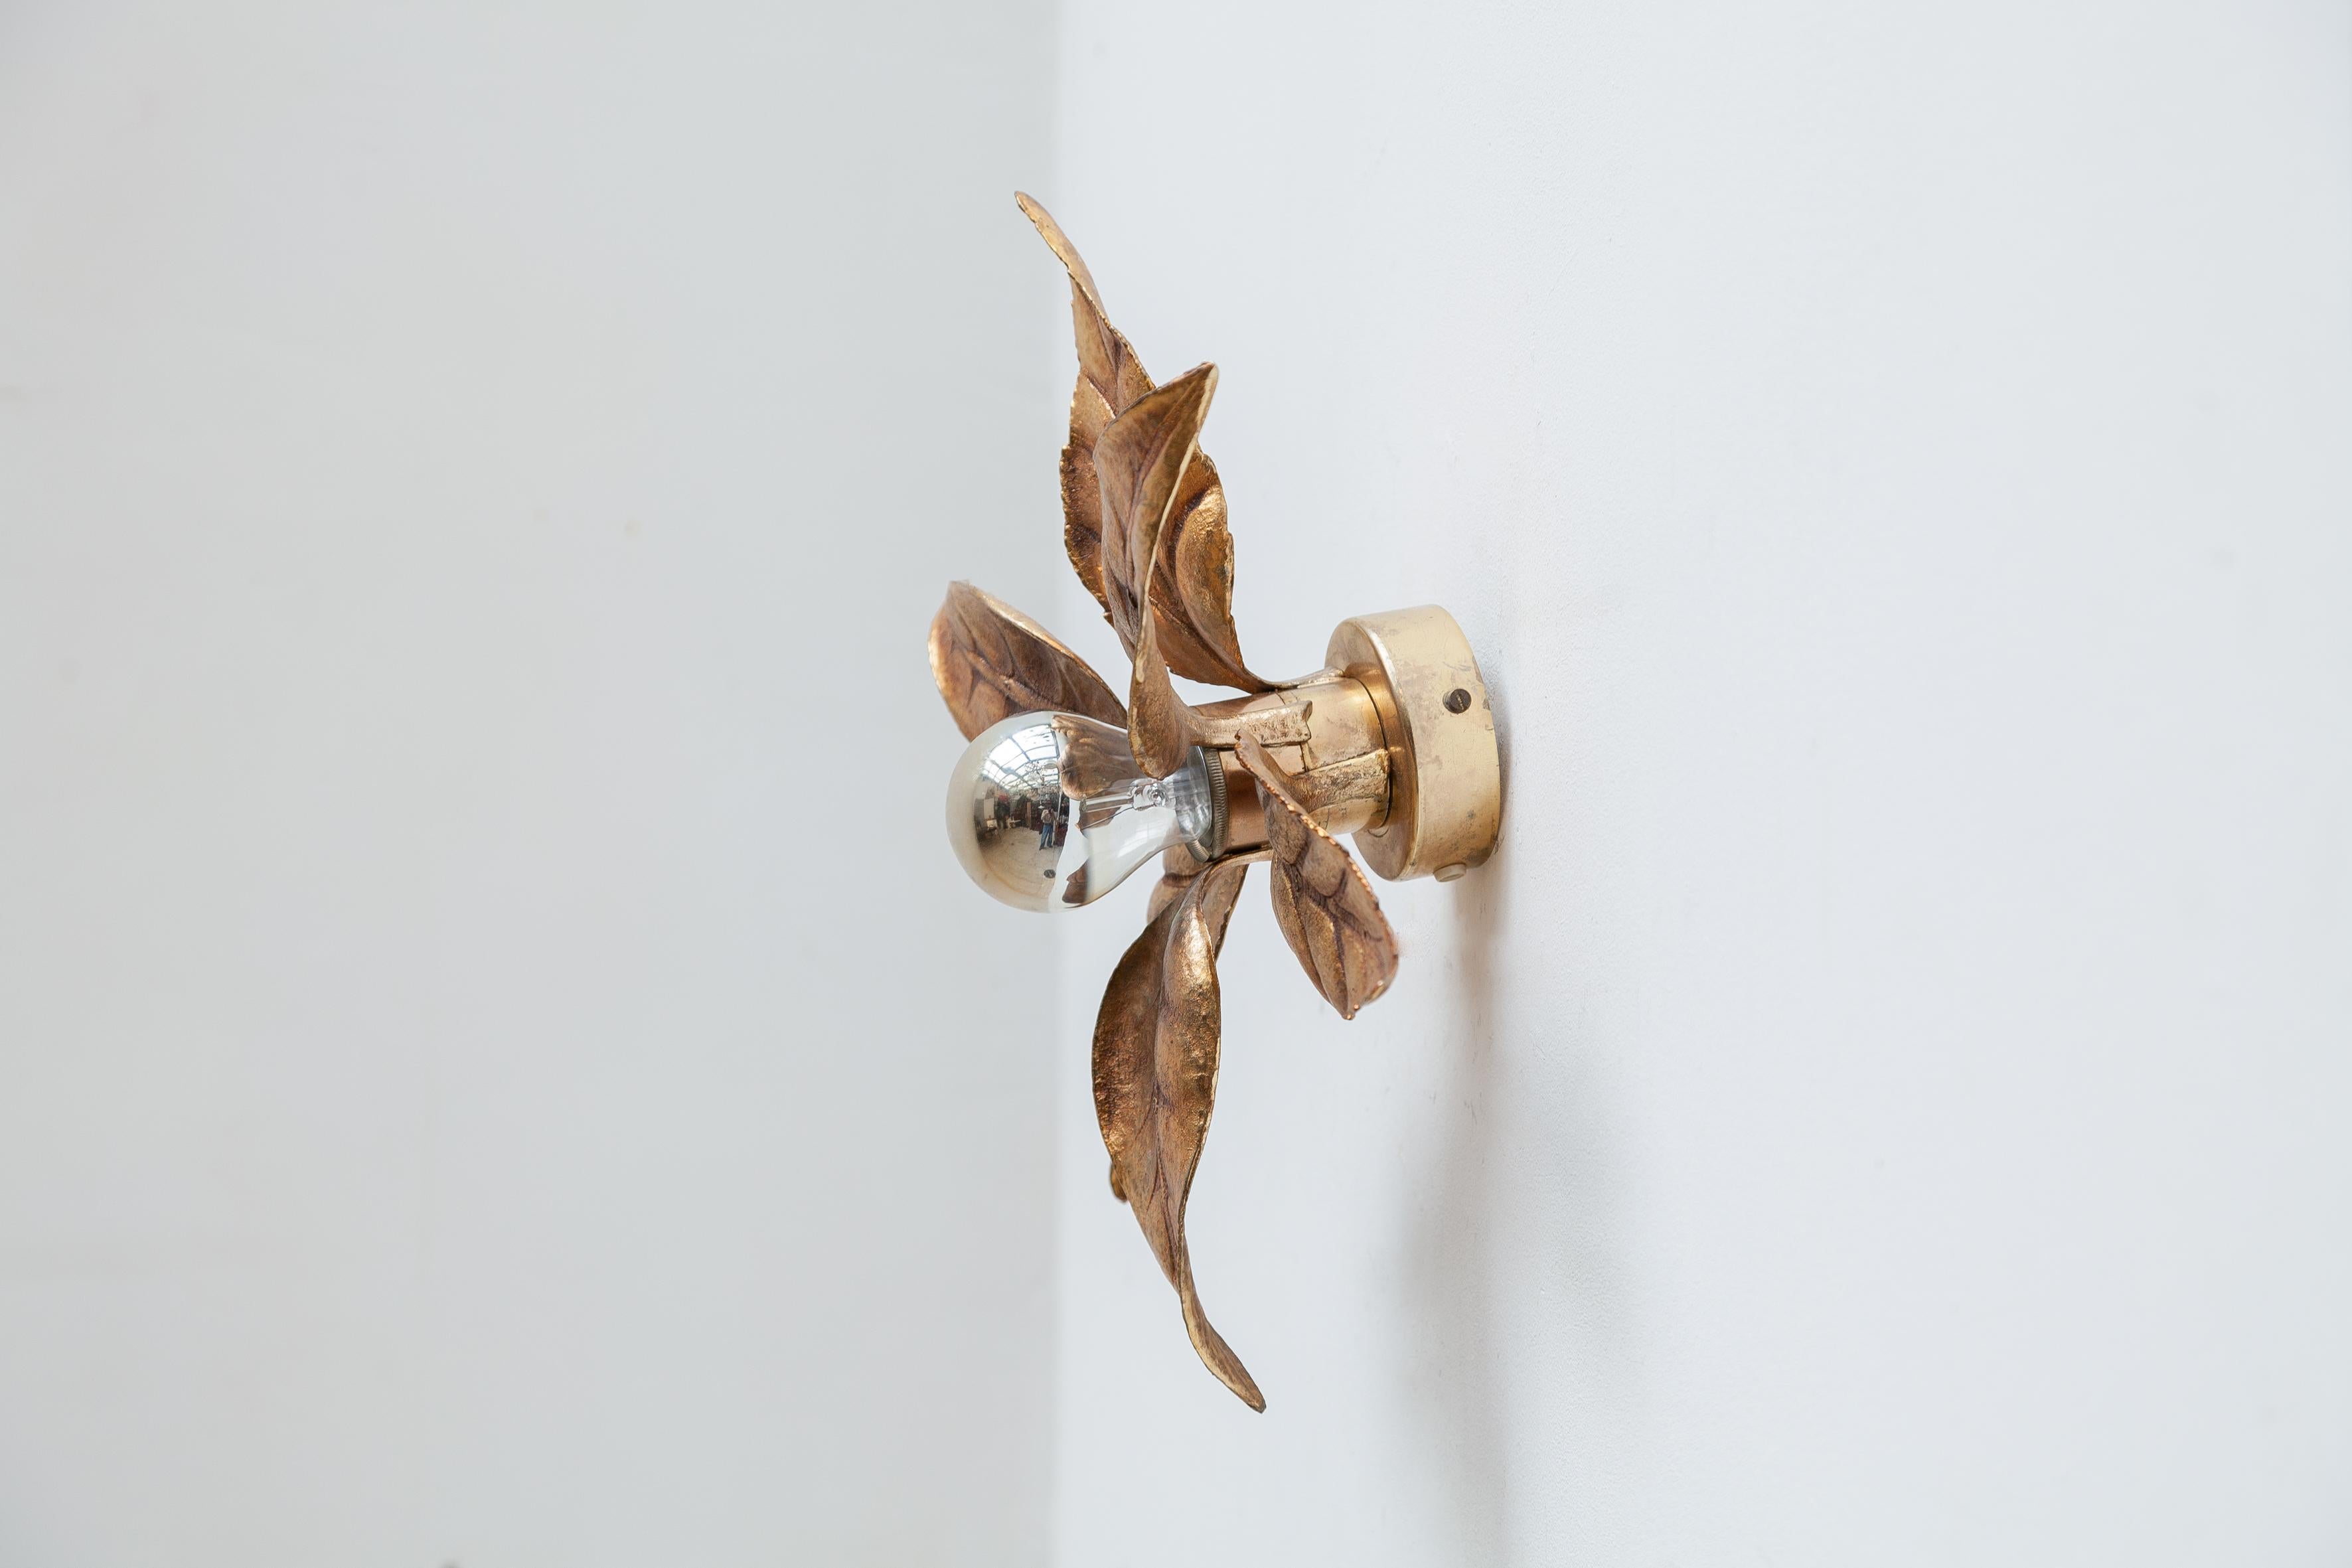 Austrian Brass Flower Leave Sconces in style of Willy Daro, 1970s, Belgium